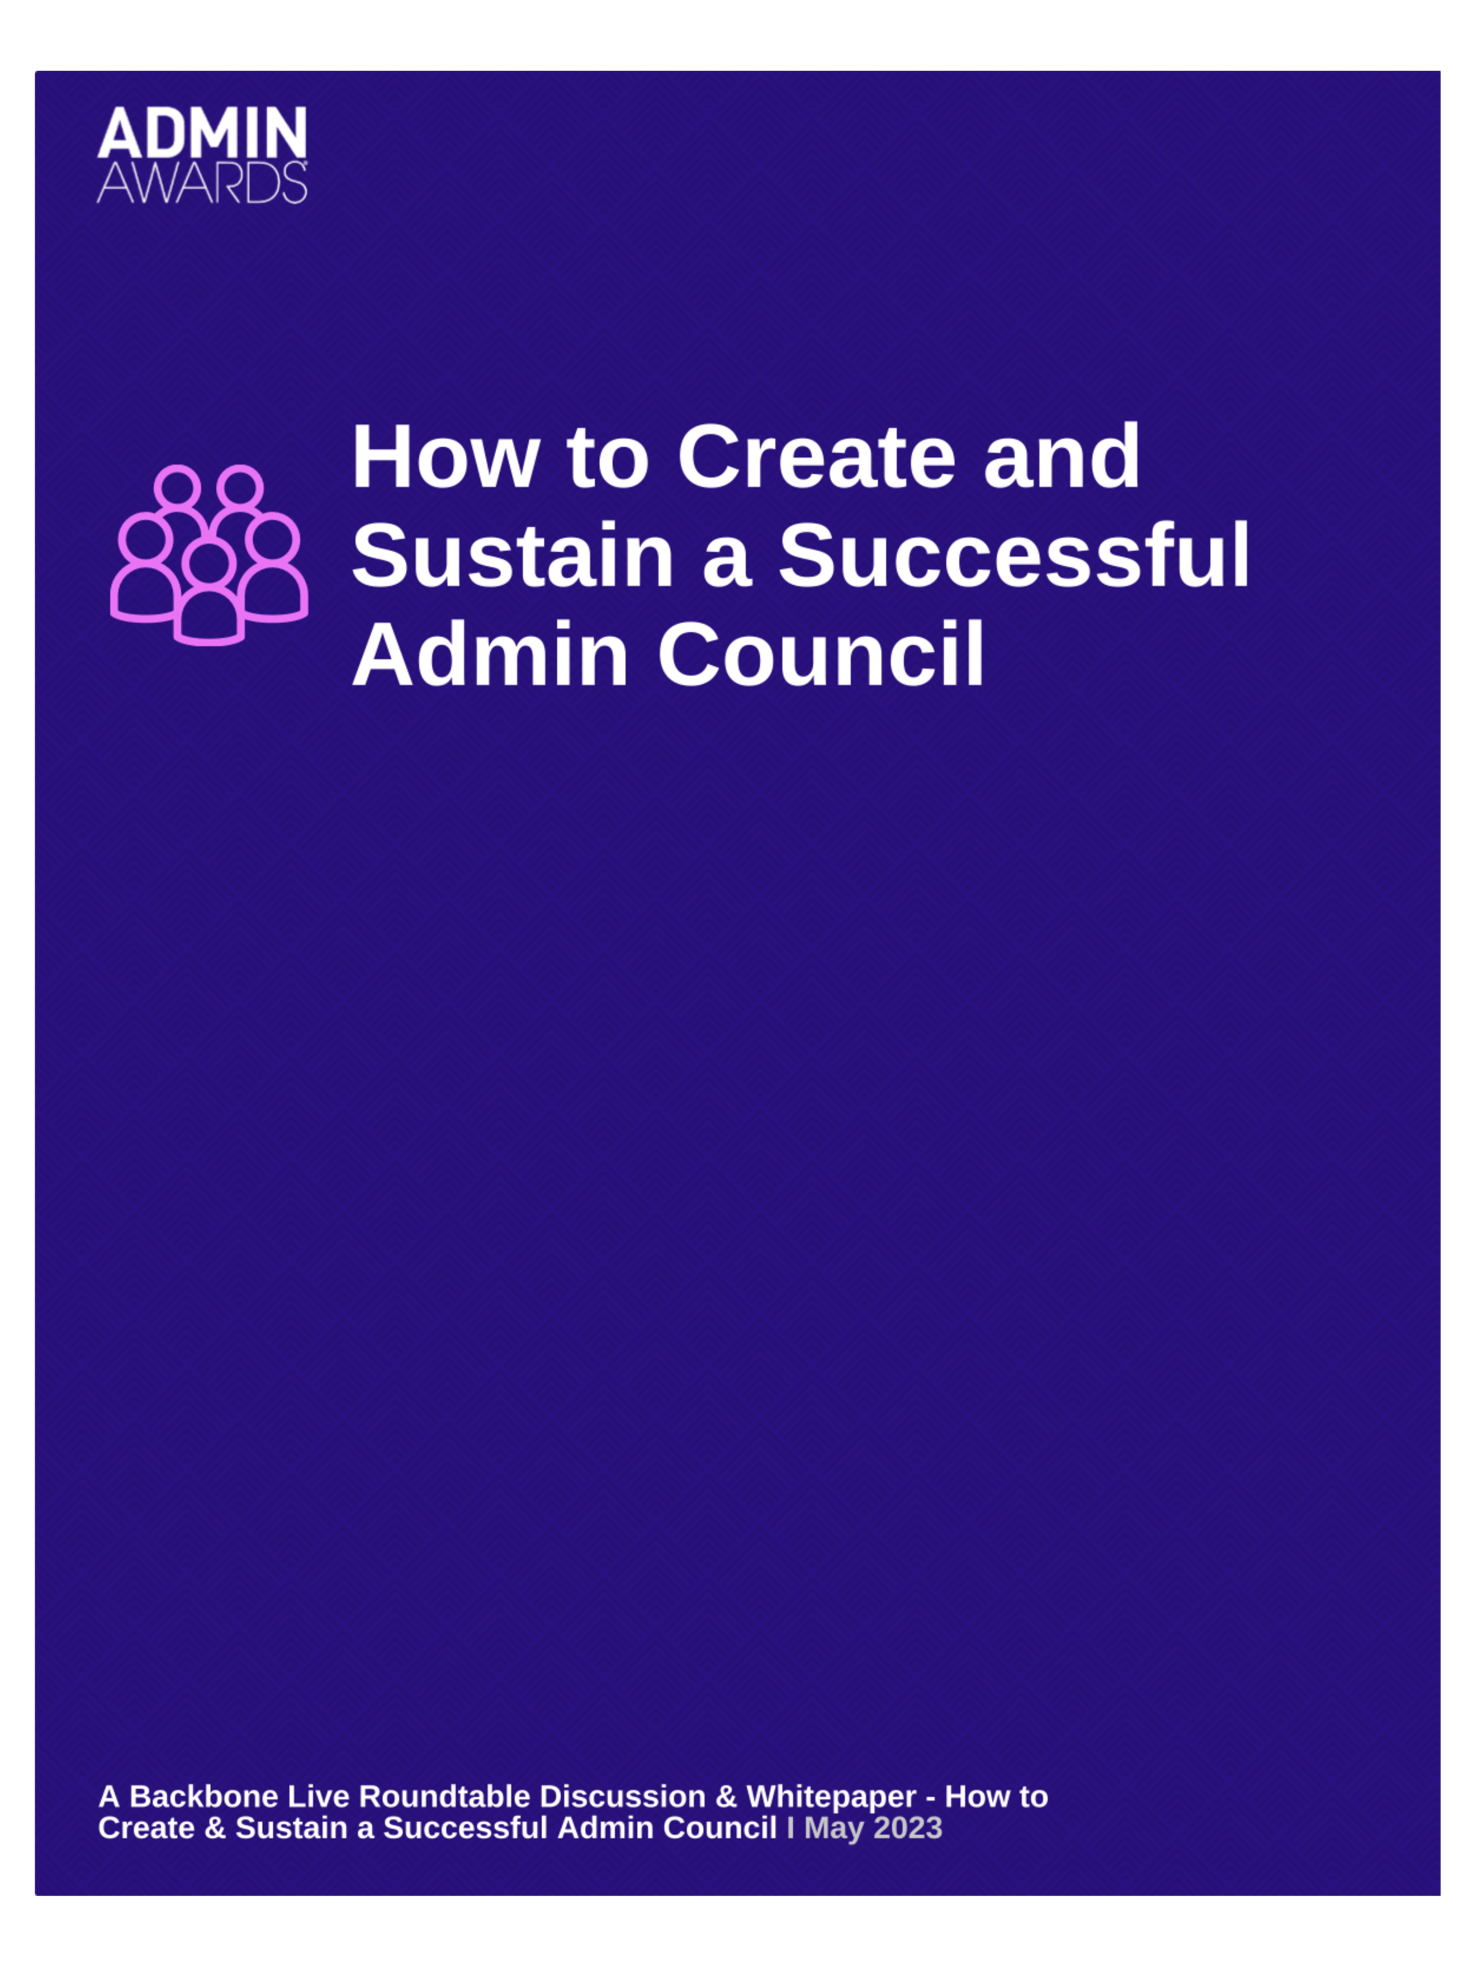 How to Create and Sustain a Successful Admin Council - Whitepaper